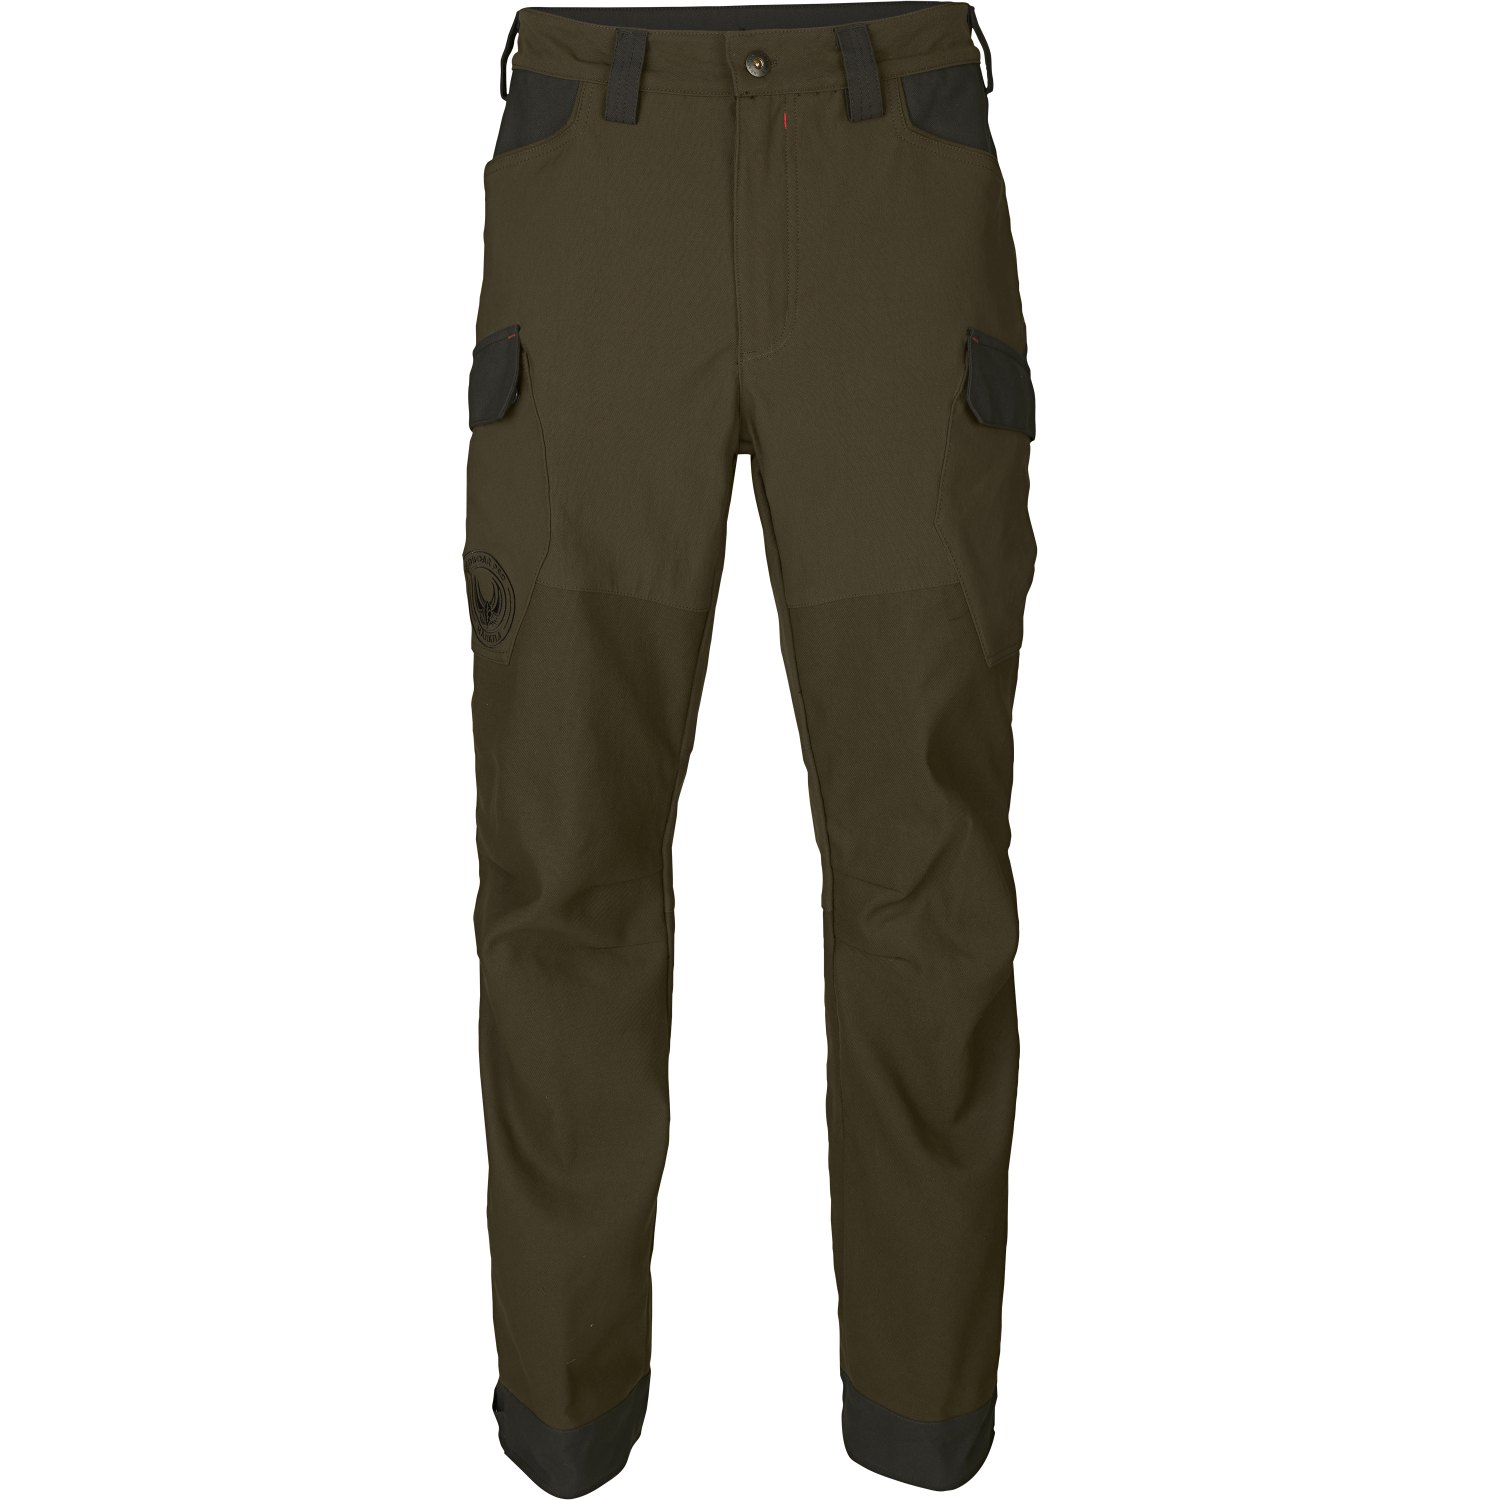 Pro Hunter Dog Keeper GORE-TEX Pants from Härkila - Buy now